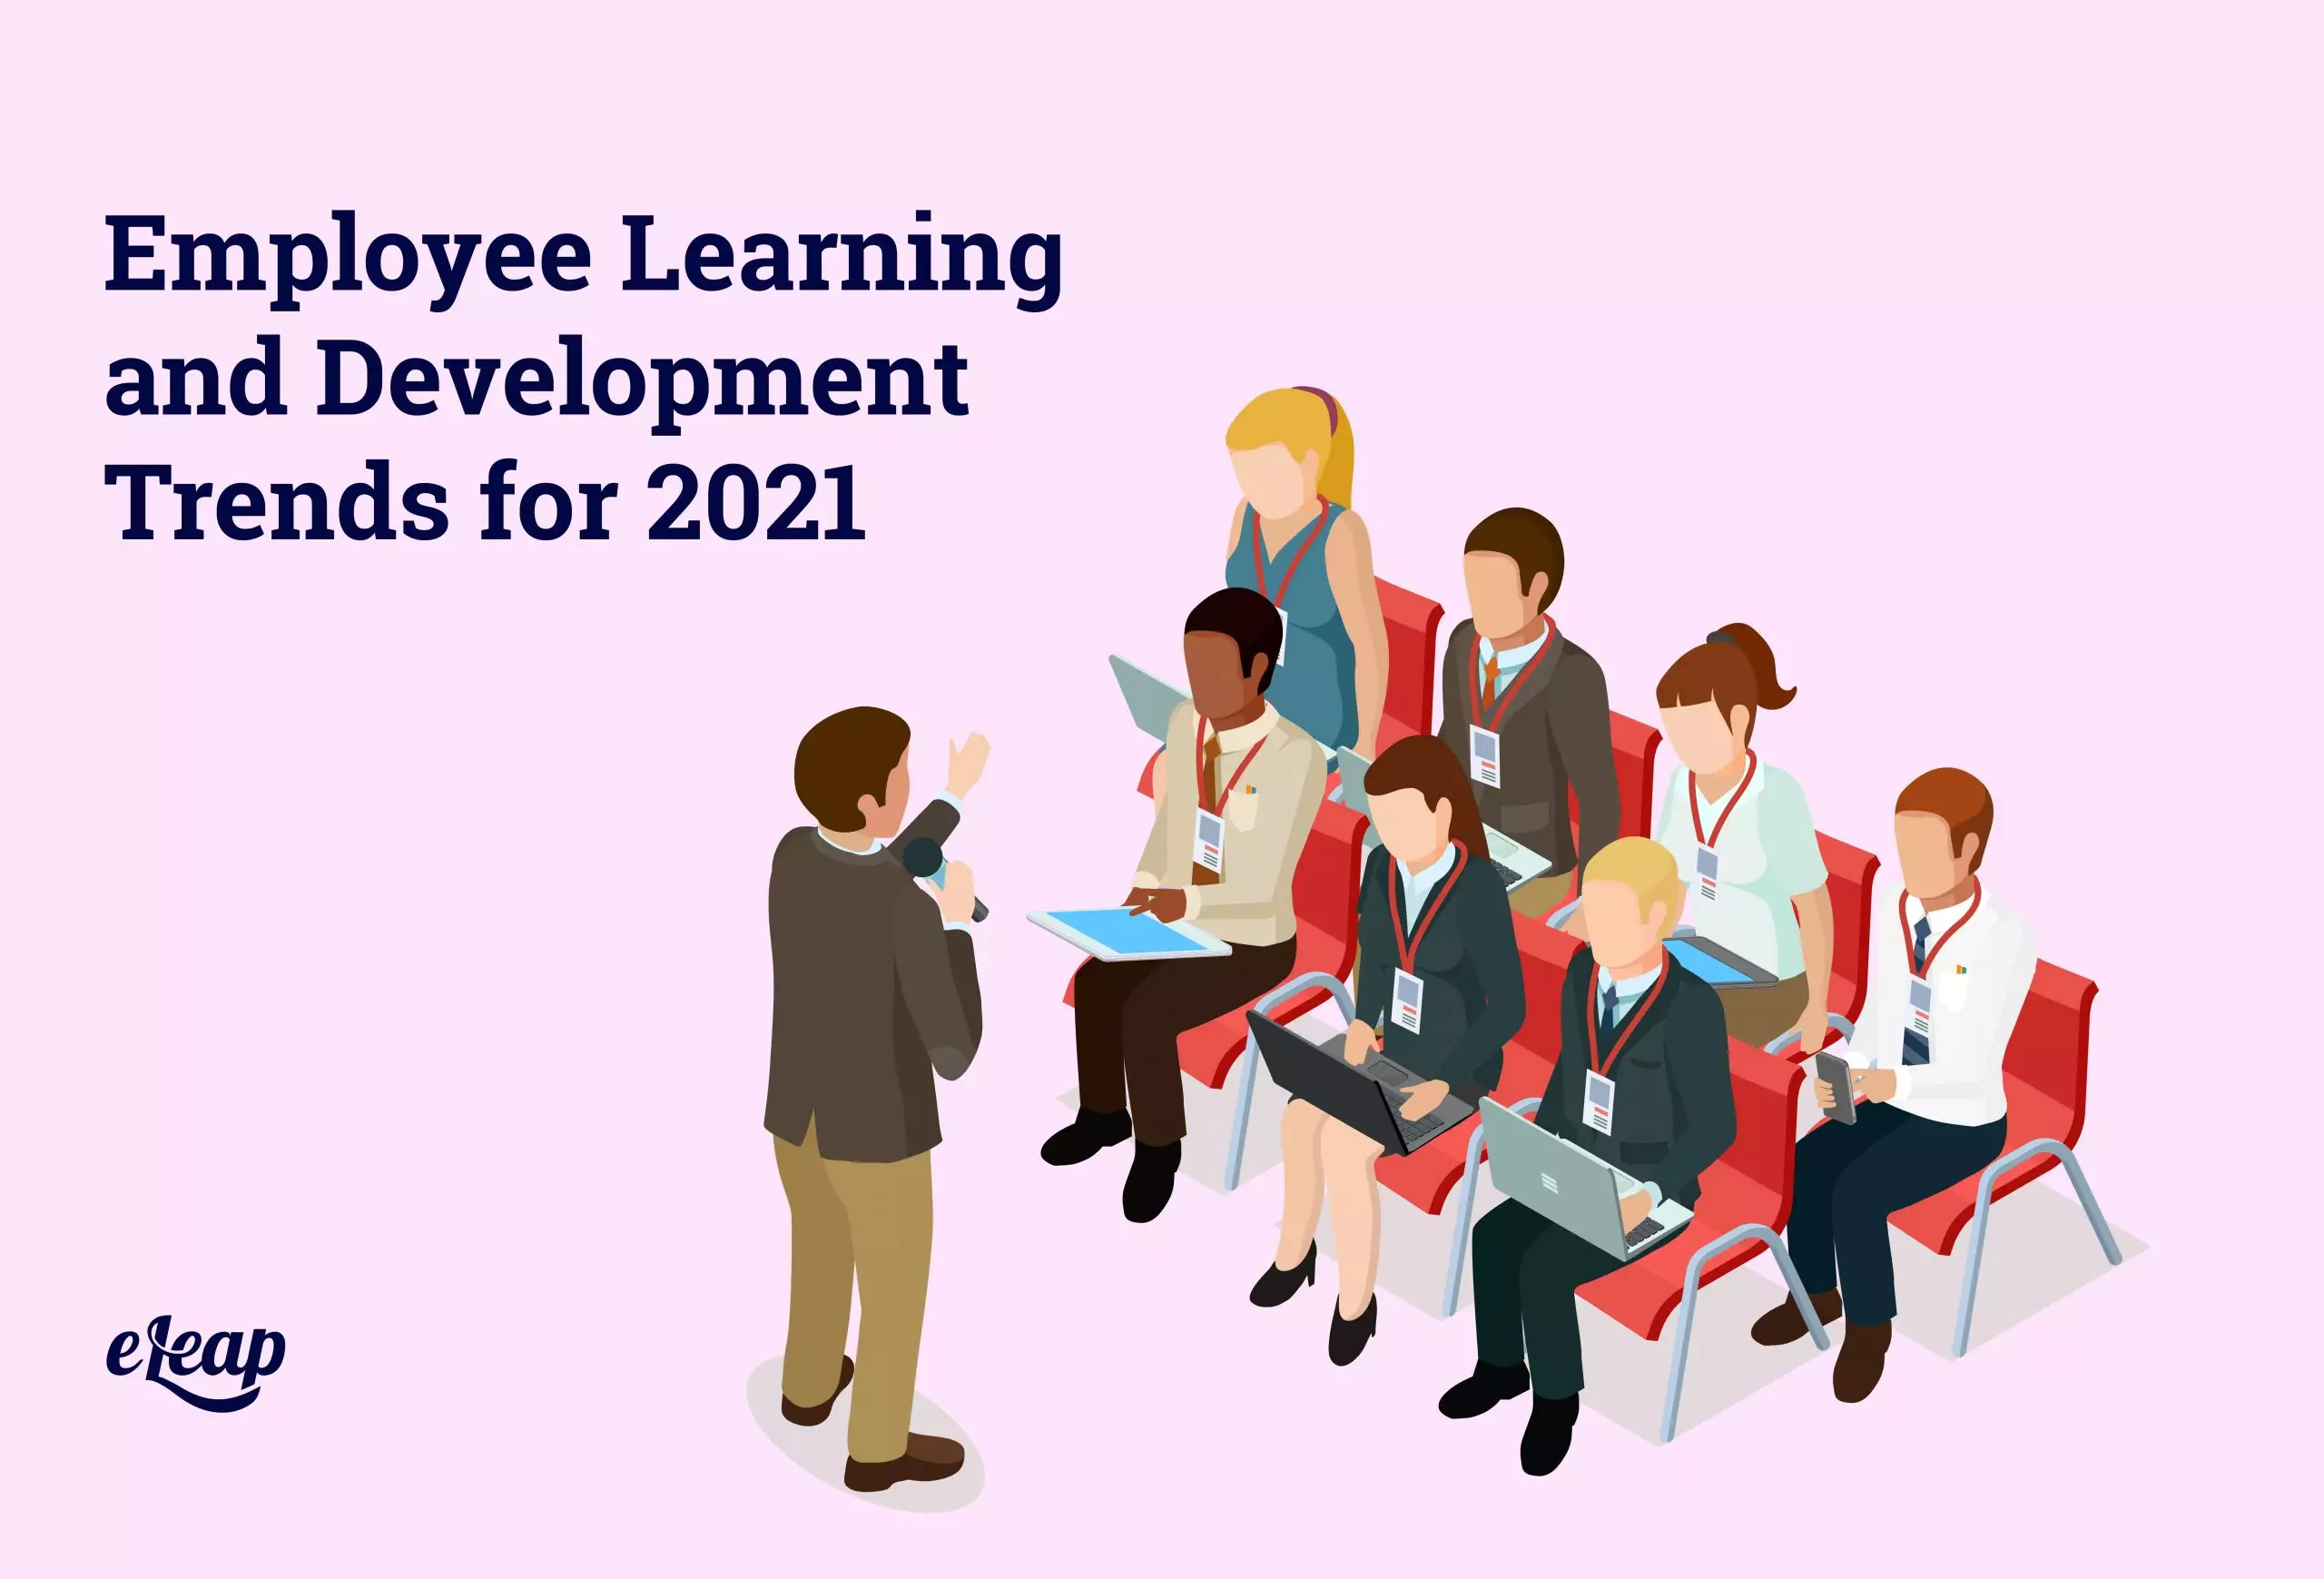 Employee Learning and Development Trends for 2021